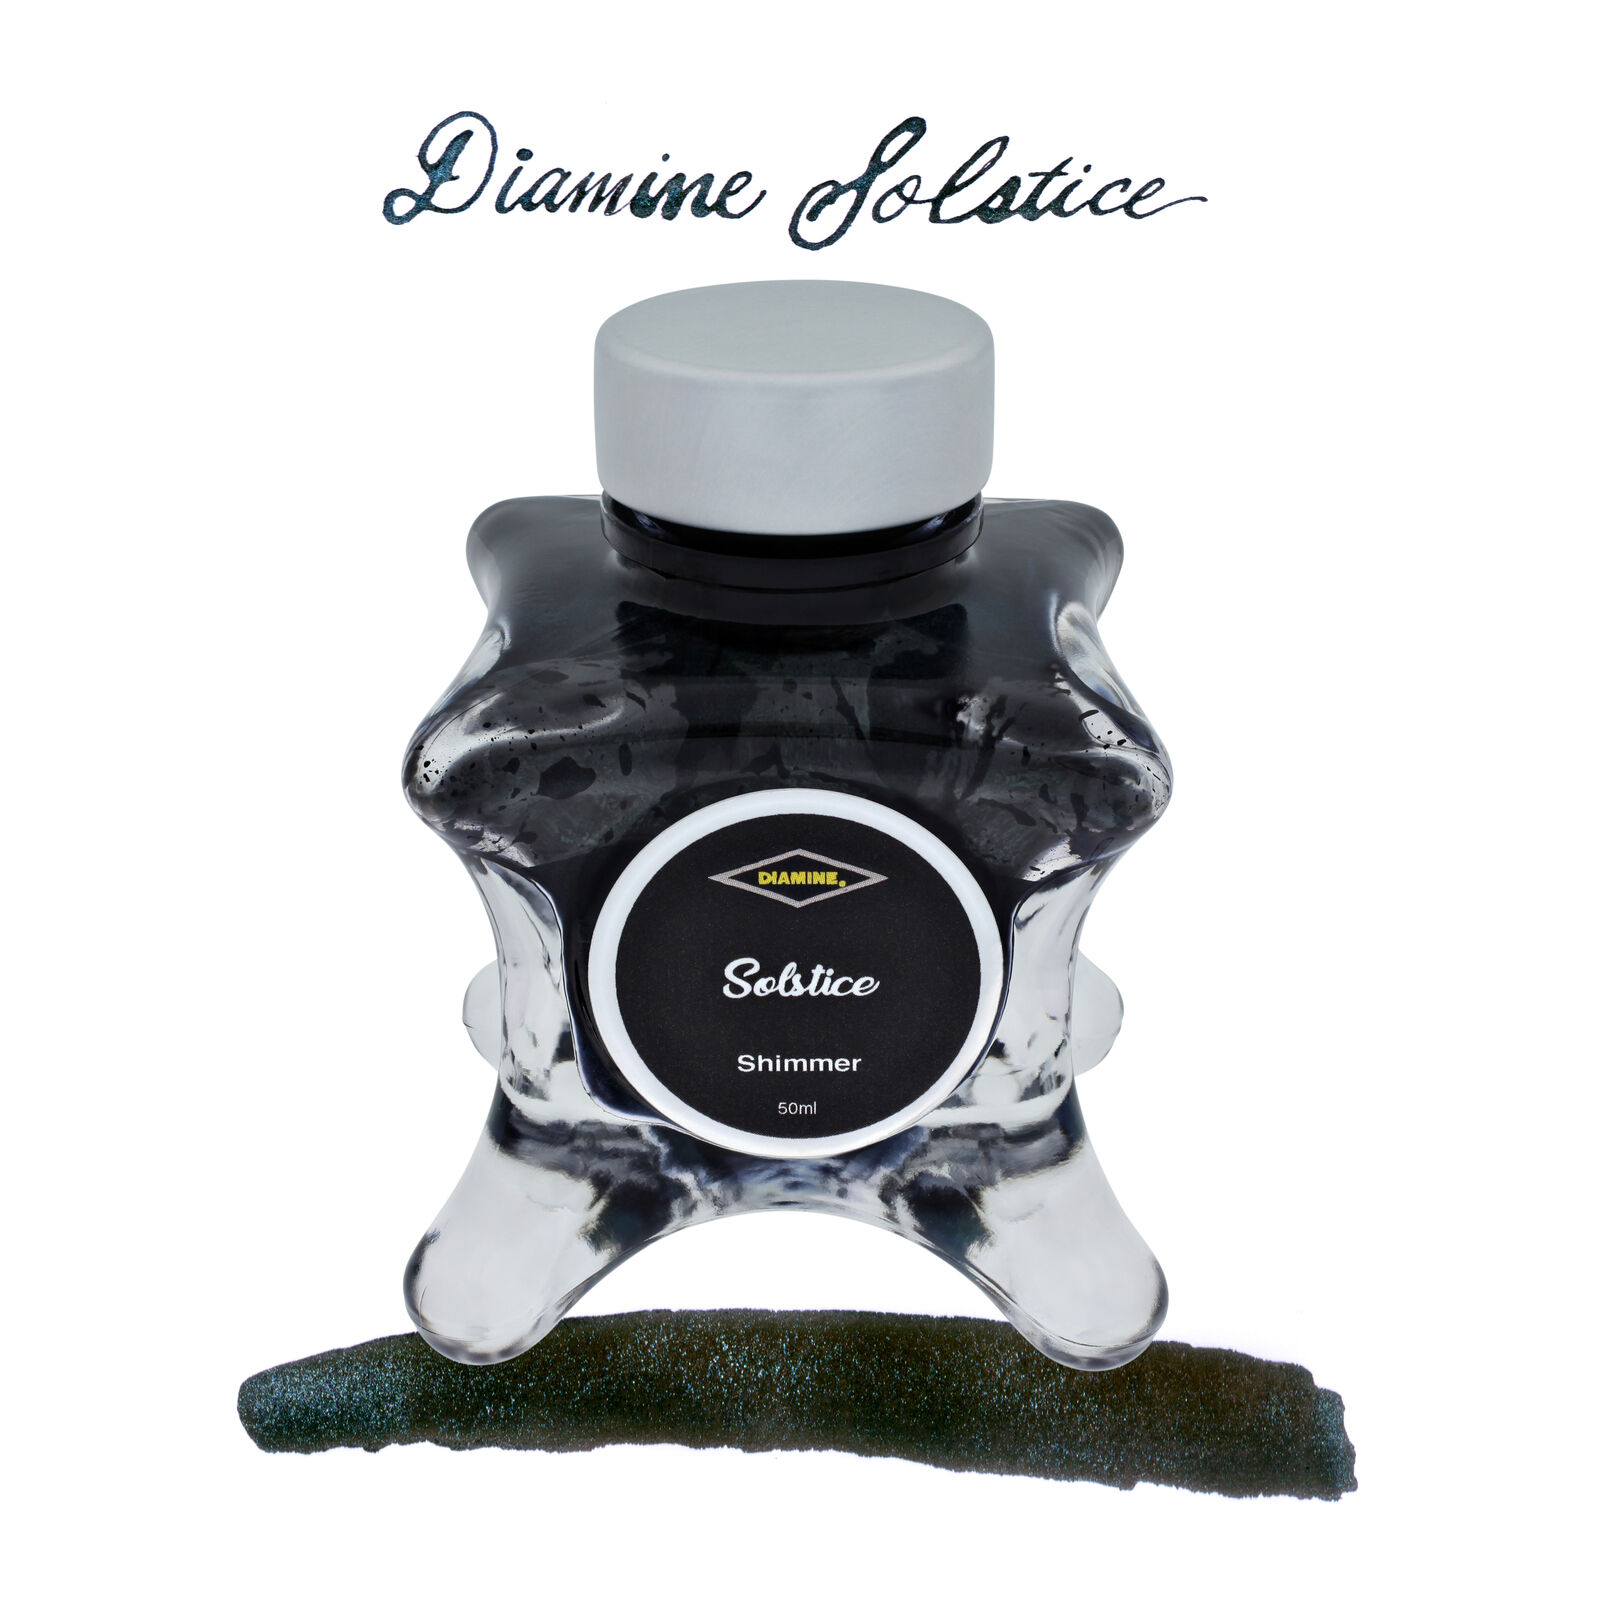 Diamine Inkvent Blue Edition Shimmer Bottled Ink in Solstice - 50 mL -NEW in box